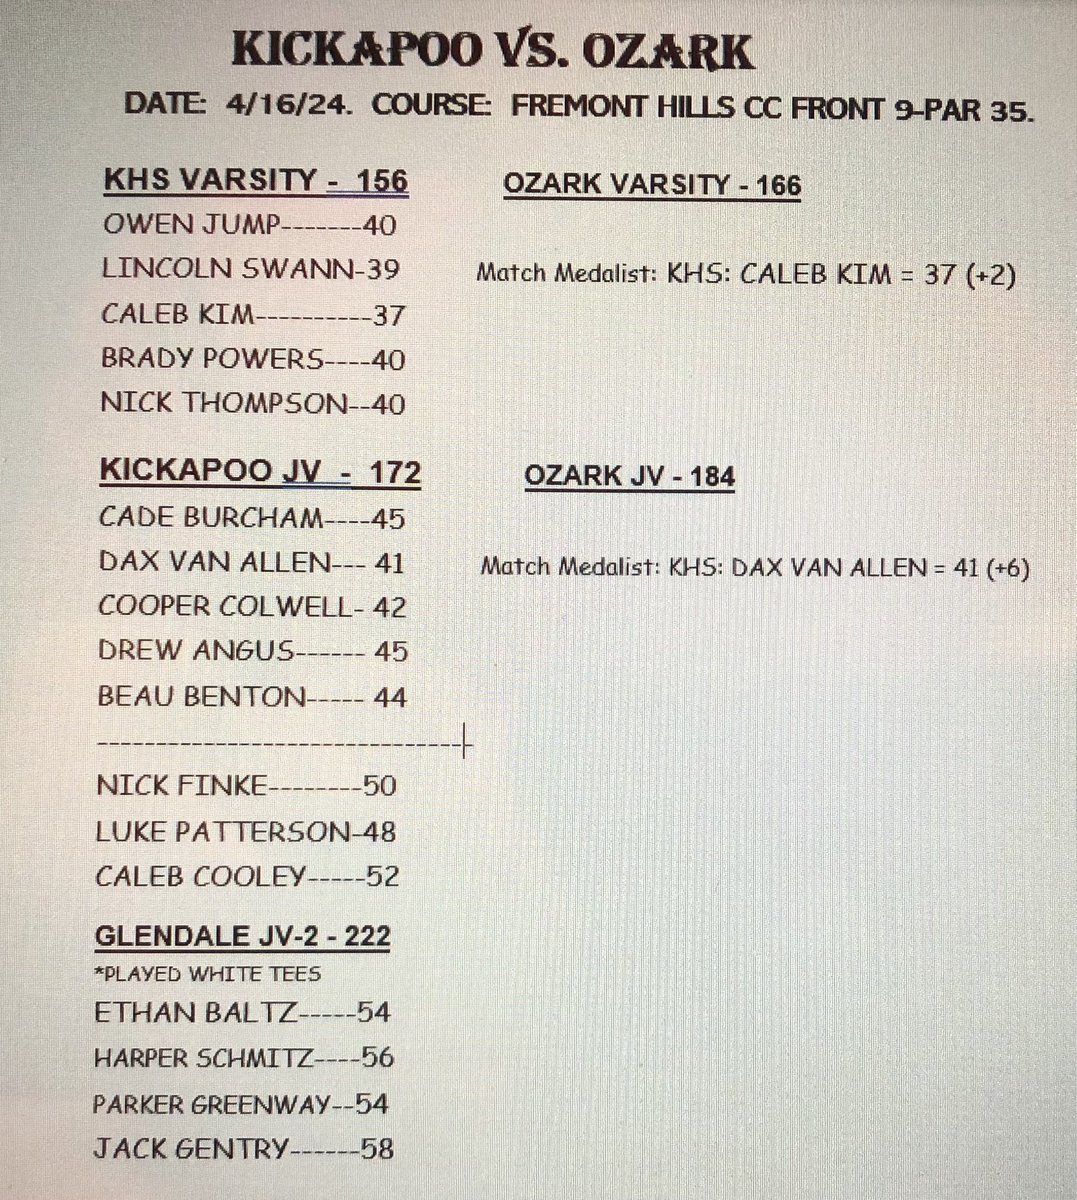 The Chiefs were victorious in a match vs. a terrific Ozark team at Fremont Hills CC yesterday. Results are below. Way to go Chiefs.